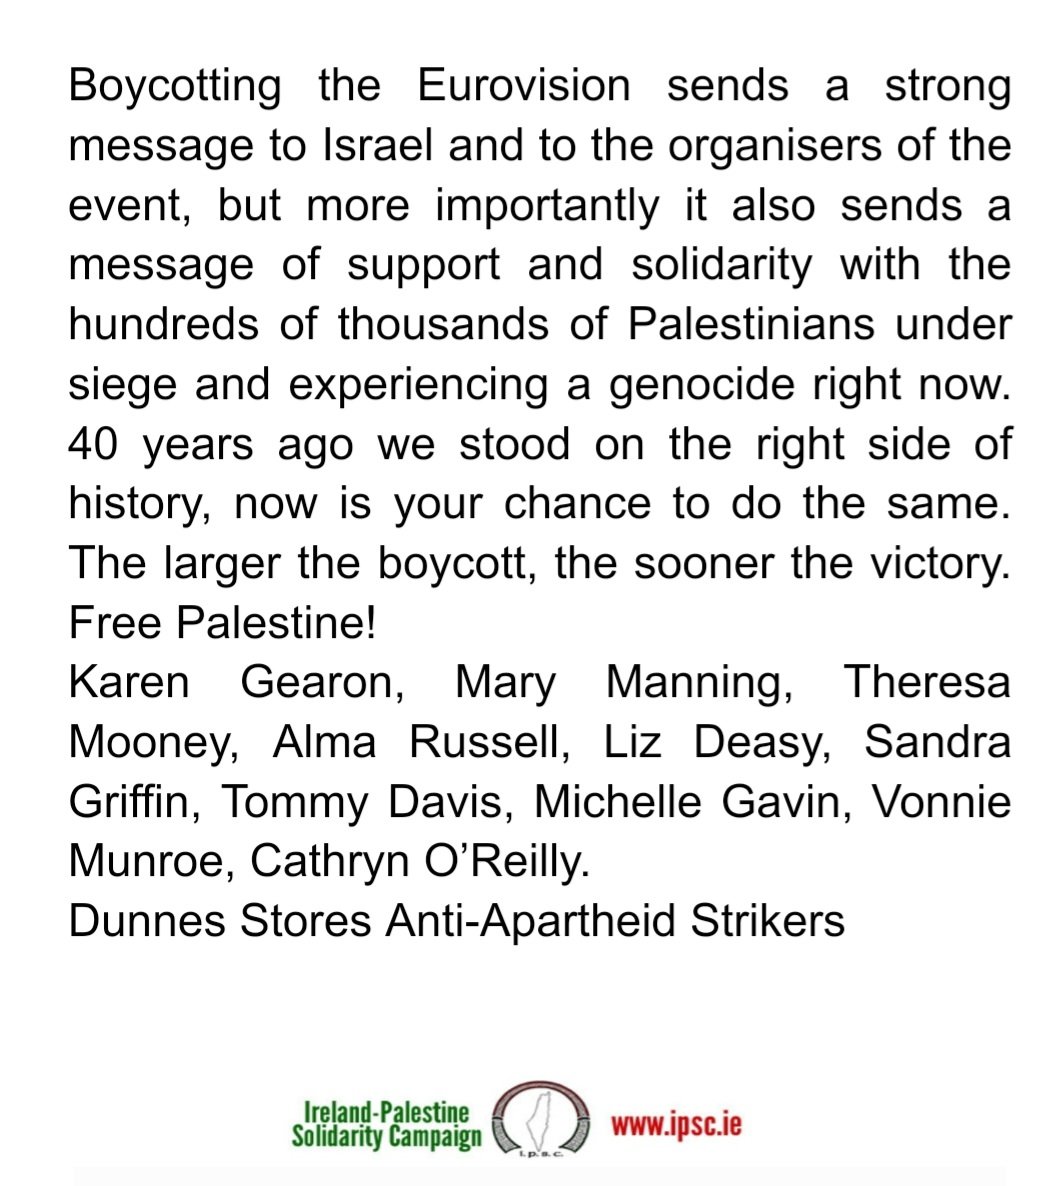 Powerful from the Dunnes Stores Strikers who led the struggle here against South African apartheid. #BoycottEurovision2024 '40 years ago we stood on the right side of history, now is your chance to do the same. The larger the boycott, the sooner the victory. Free Palestine!'